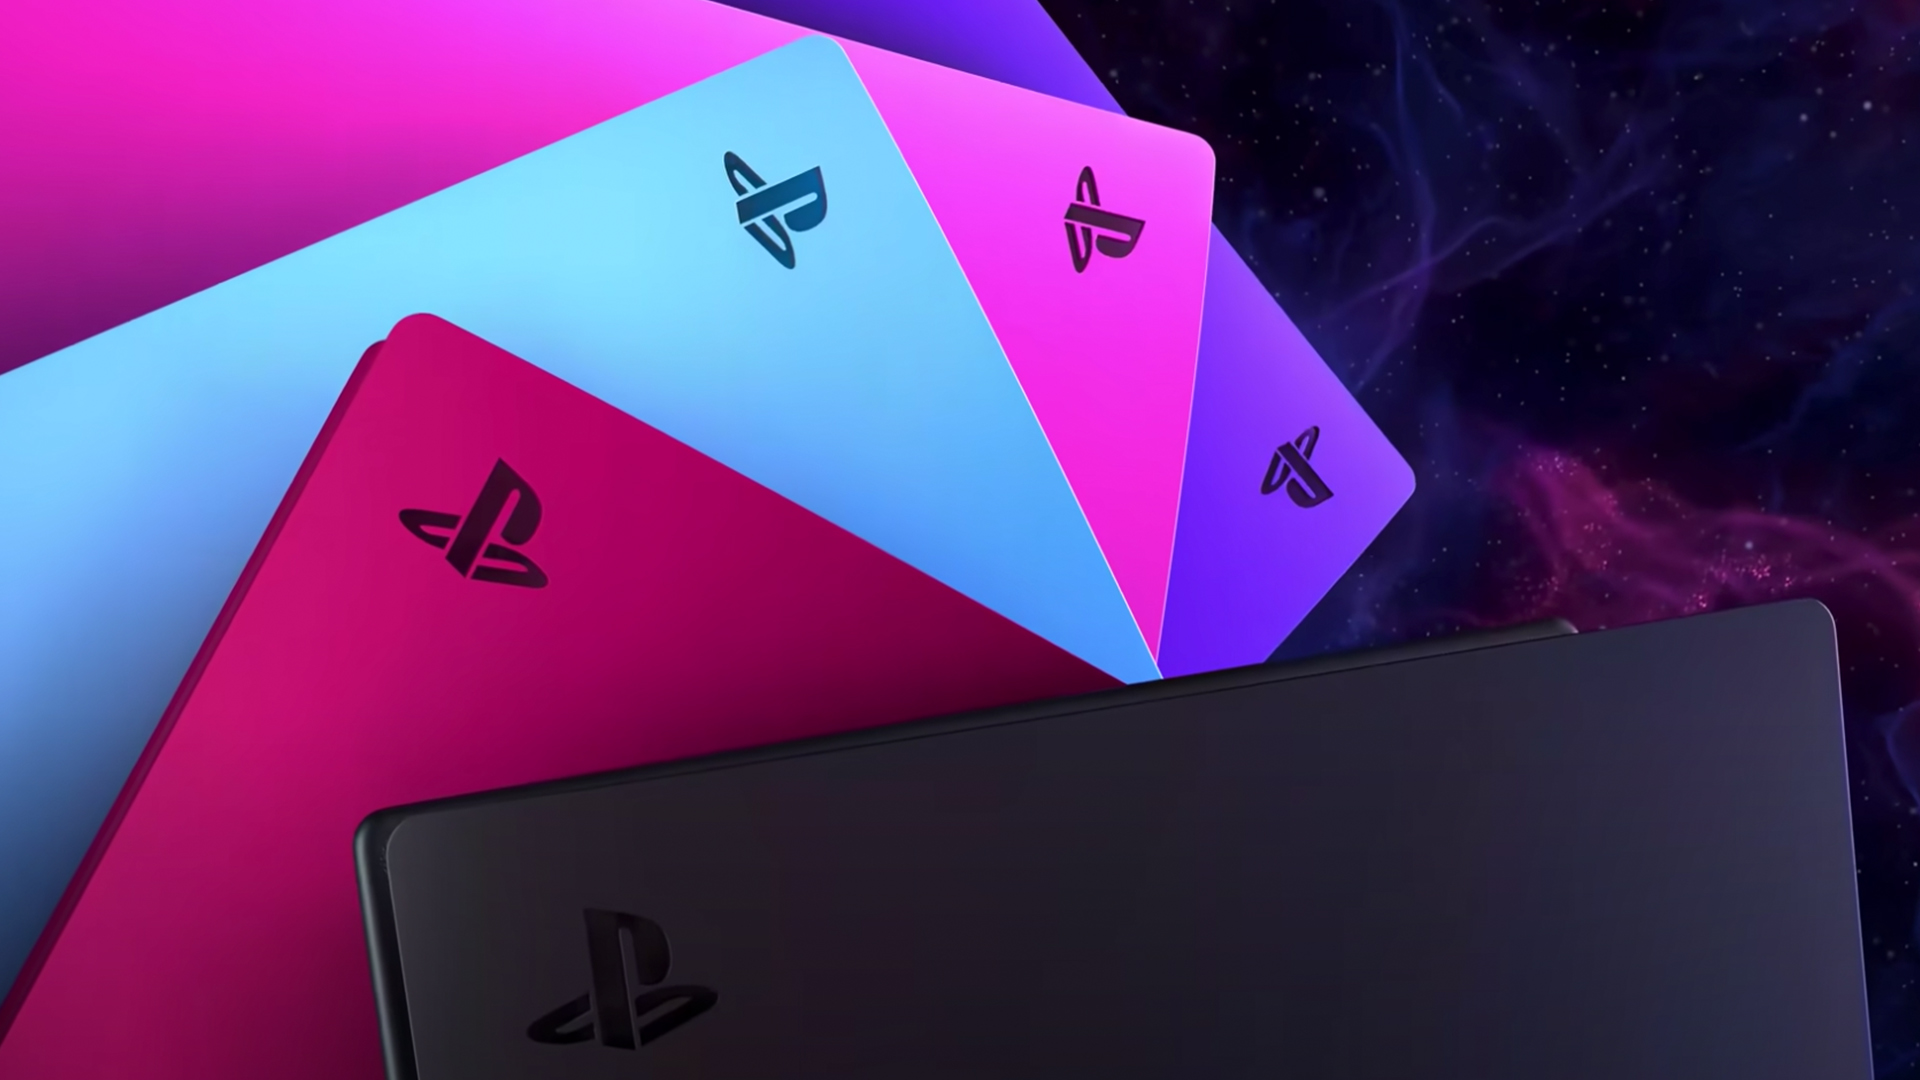 Sony brought its new PS5 colors to CES - The Verge